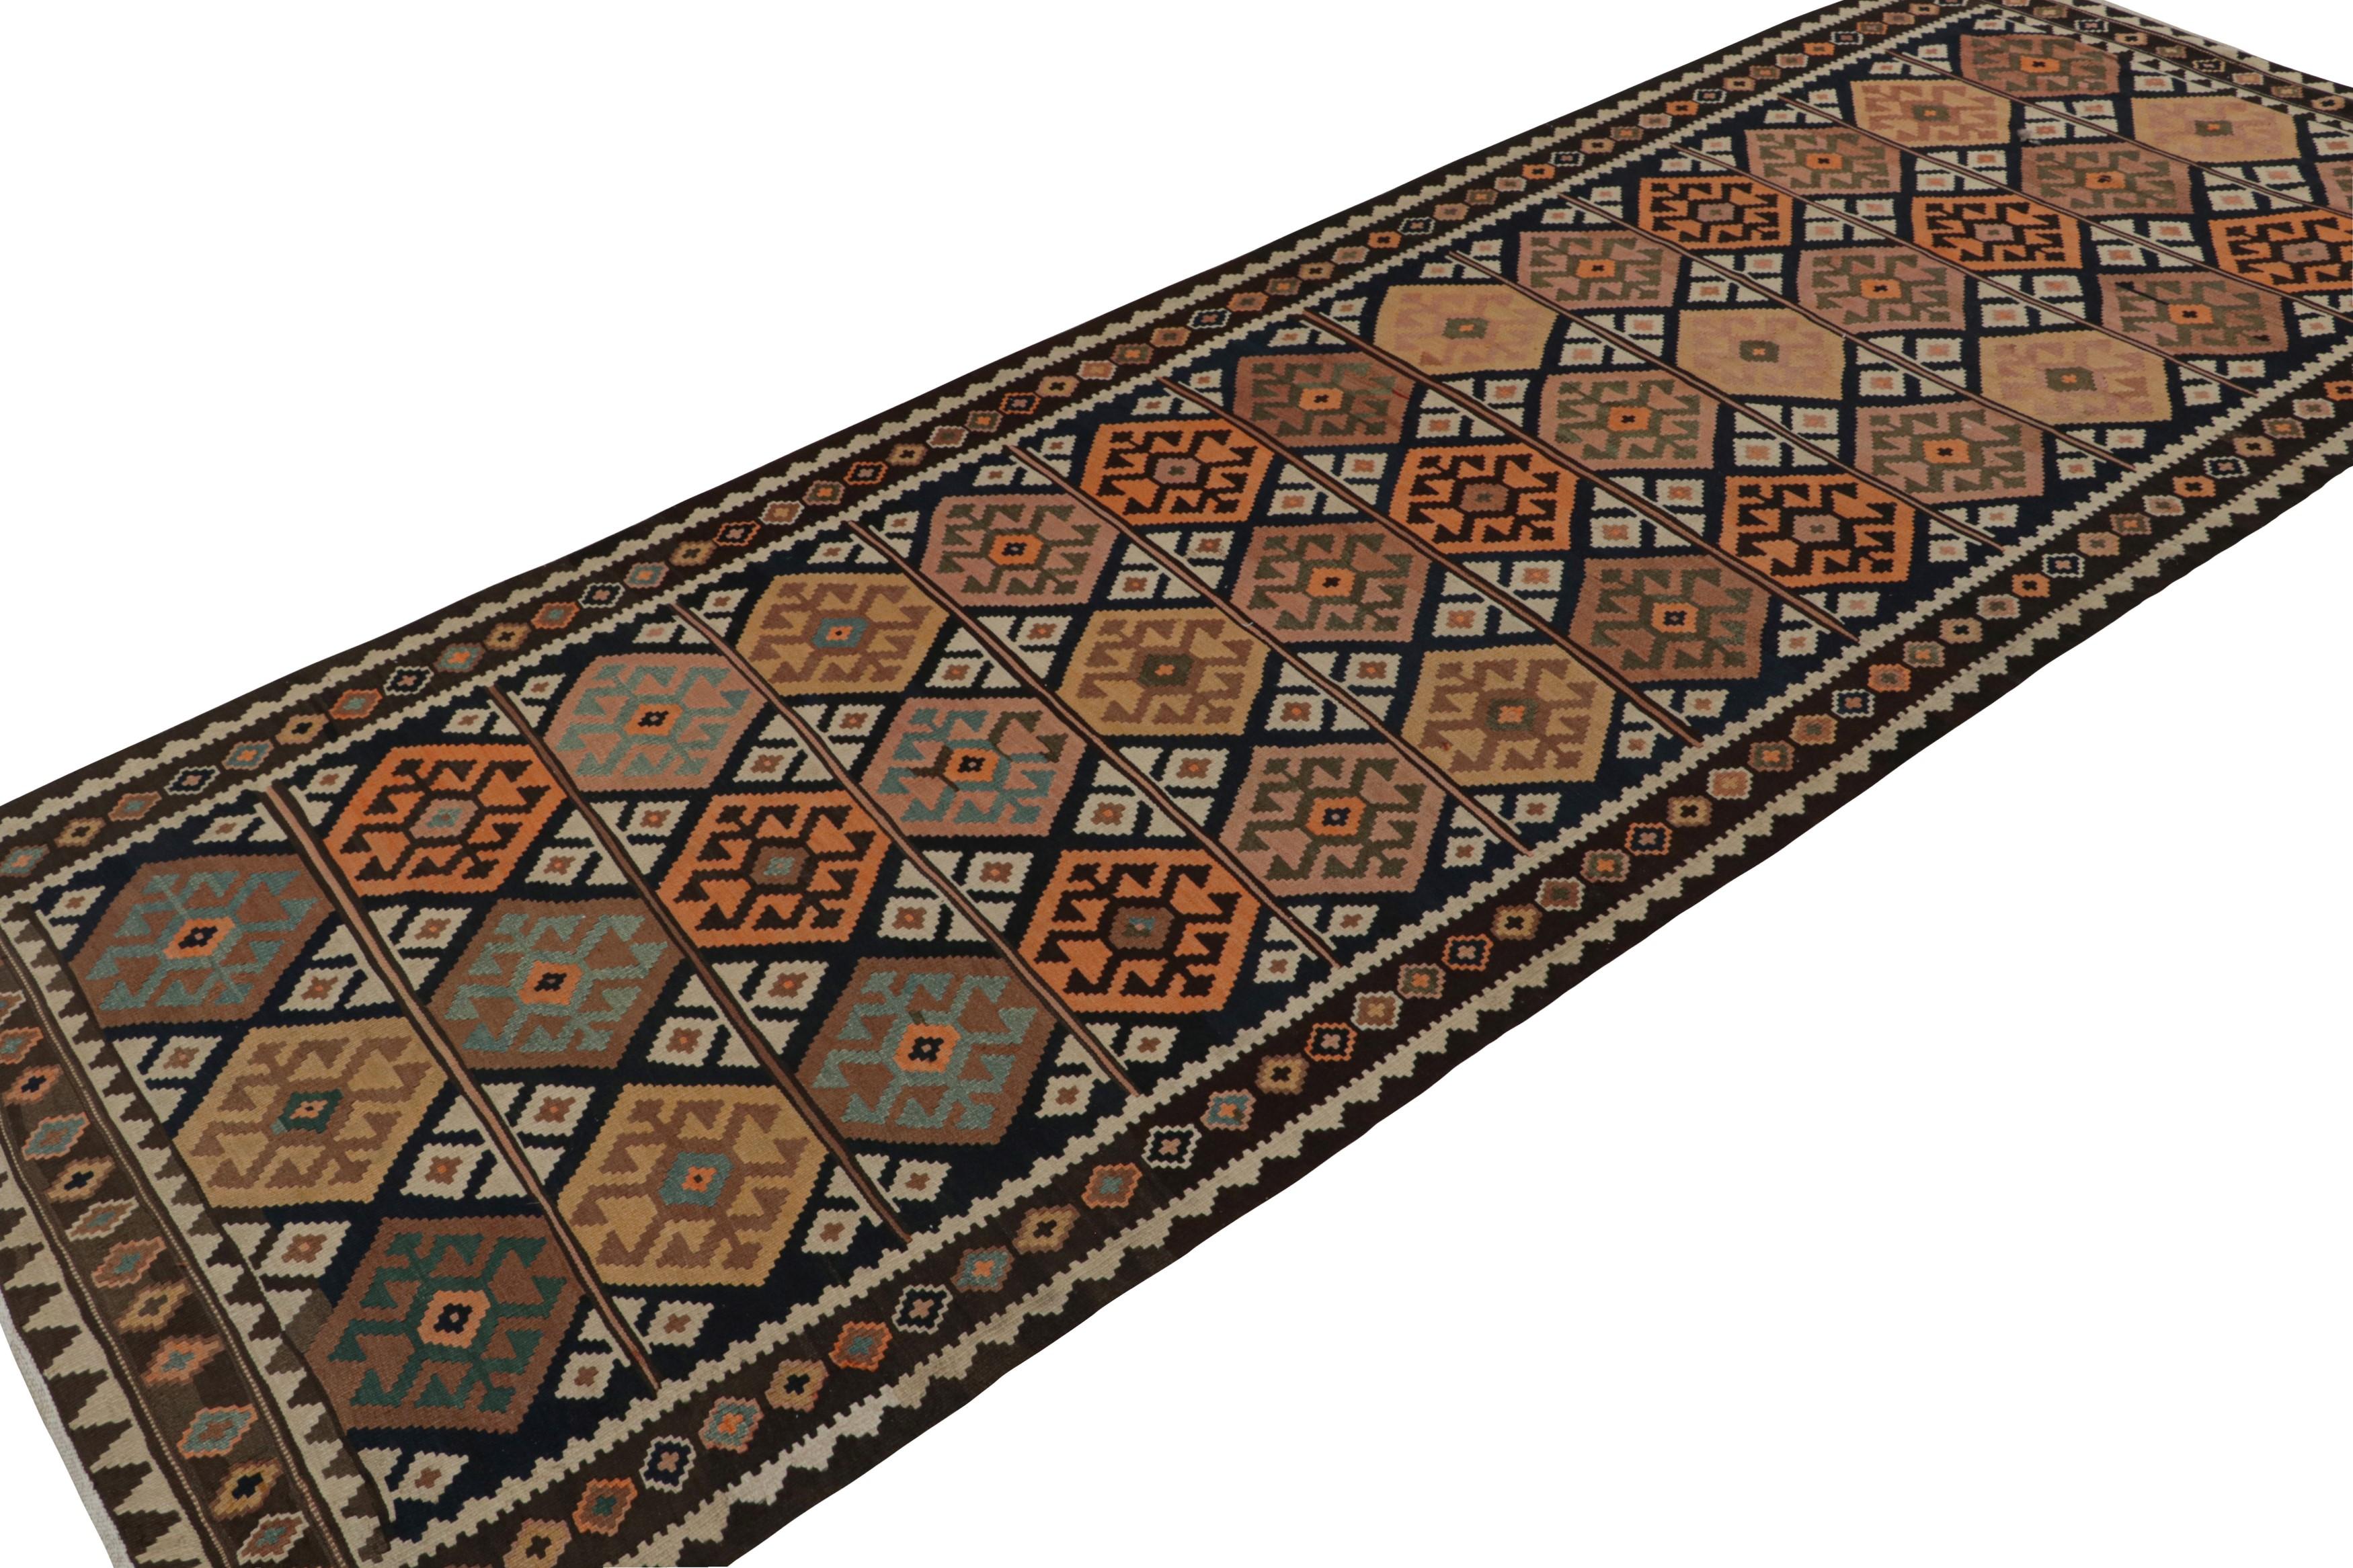 Hand-knotted in wool, circa 1960-1970, from the titular region of Turkey, this 5x14 vintage Afghan tribal kilim and gallery runner rug is an exciting addition to the Rug & Kilim Collection. This rug features a colorful play of medallion-style